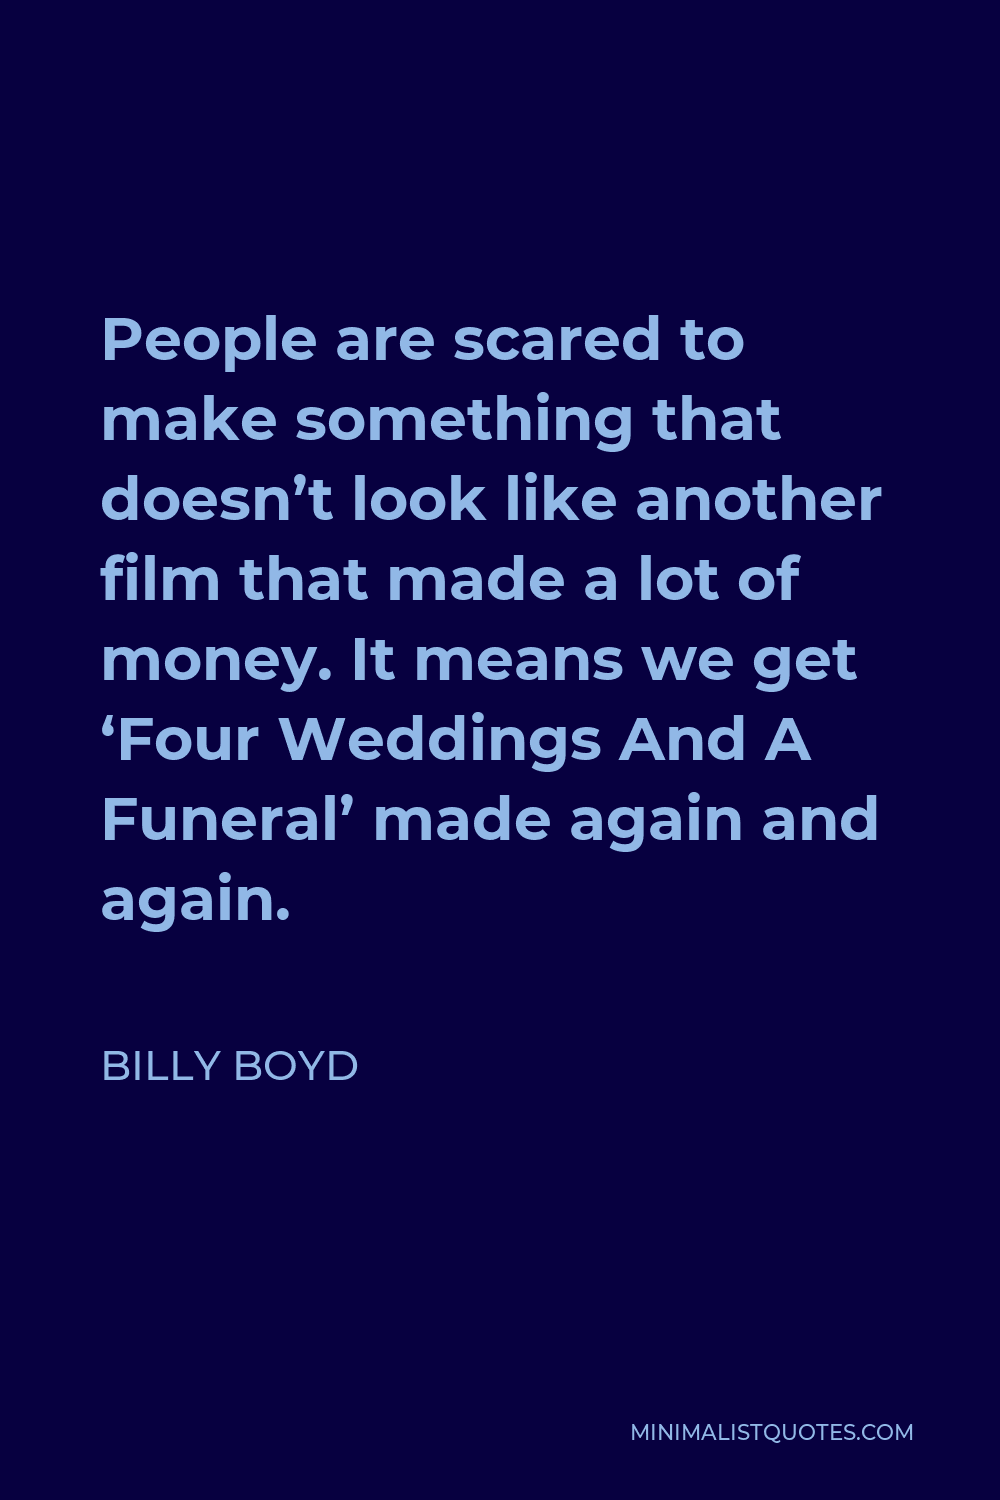 Billy Boyd Quote - People are scared to make something that doesn’t look like another film that made a lot of money. It means we get ‘Four Weddings And A Funeral’ made again and again.